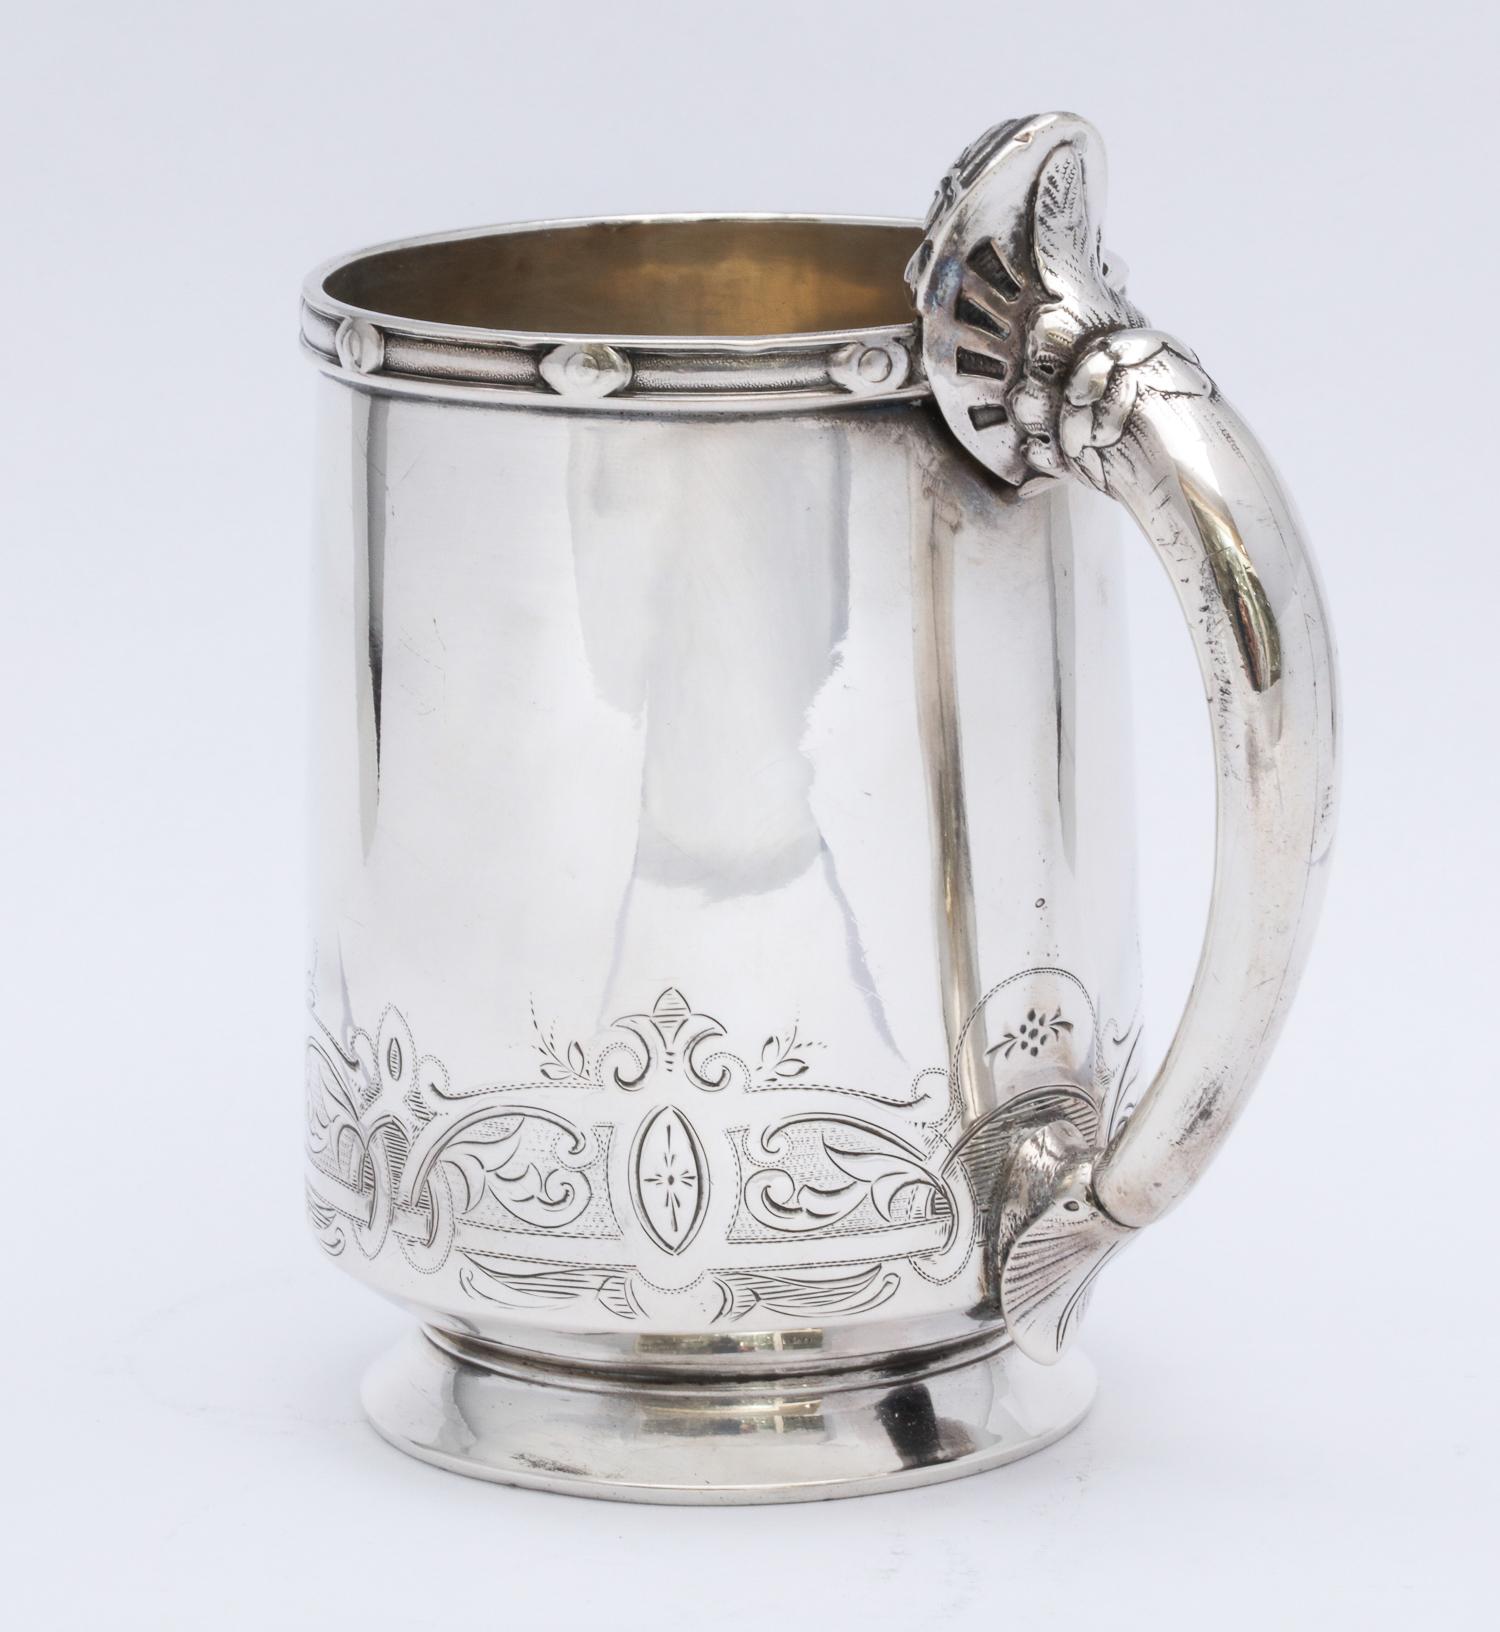 Neoclassical Sterling Silver Child's Cup/Mug by Gorham For Sale 8